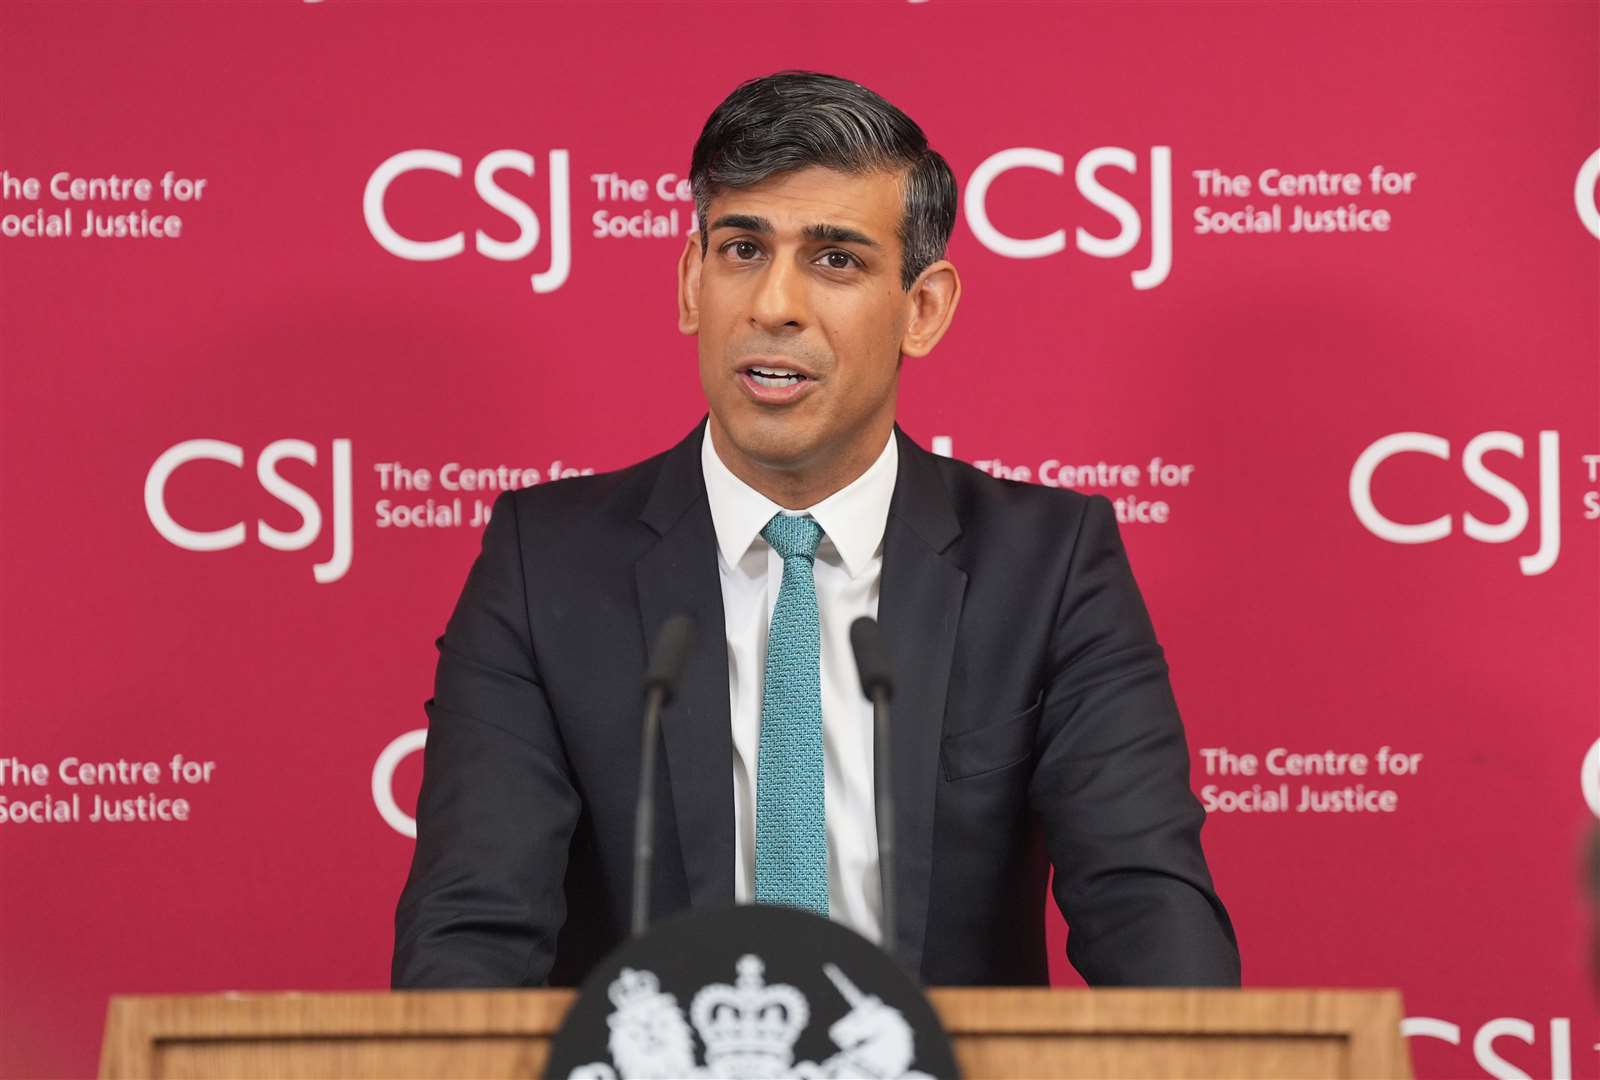 Prime Minister Rishi Sunak said it was ‘right’ that Mark Menzies resigned the party whip (Yui Mok/PA)